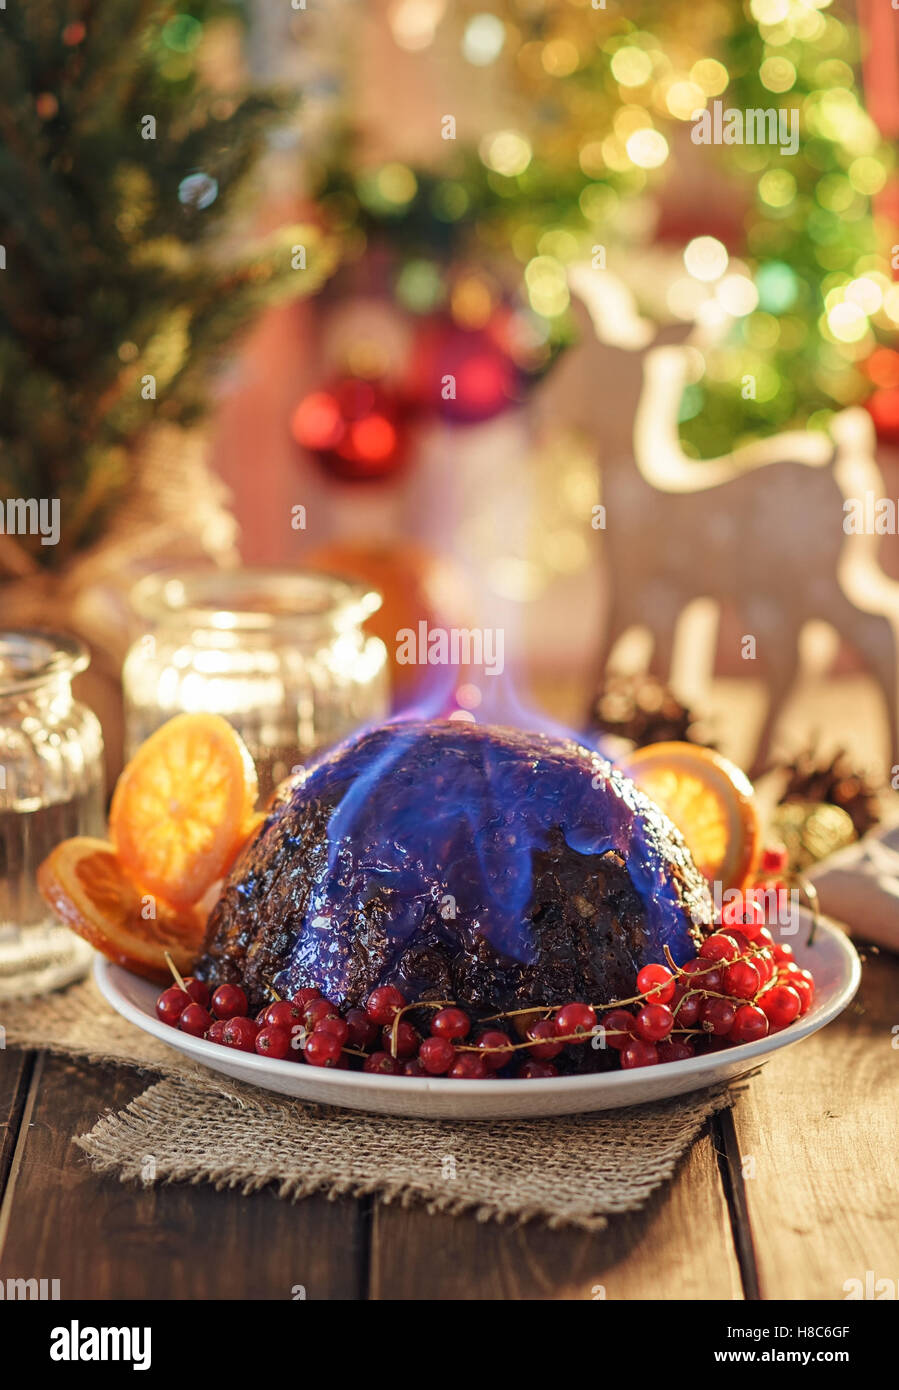 Christmas pudding flambe Banque D'Images